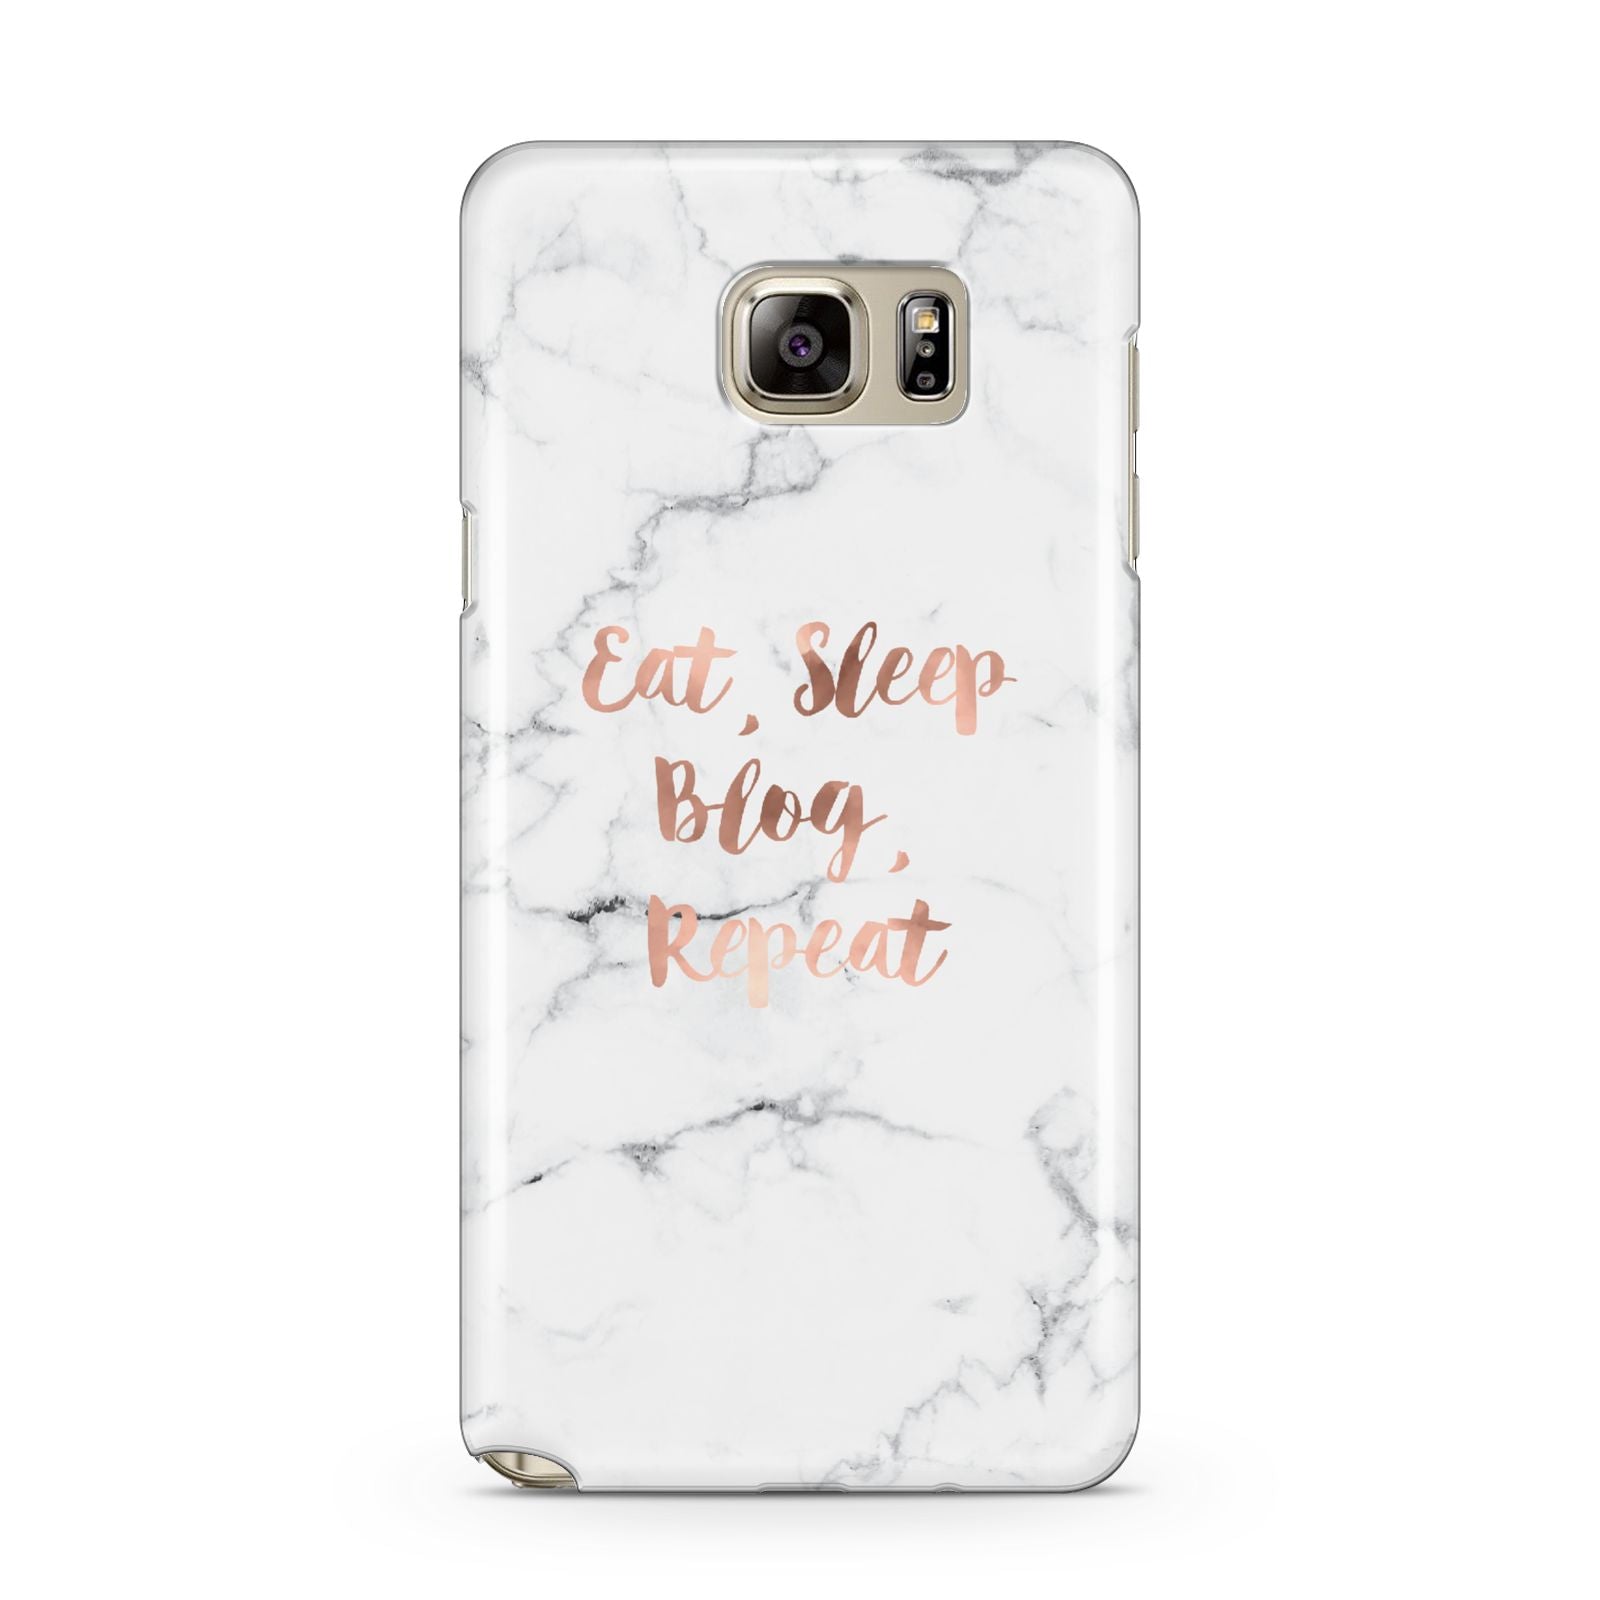 Eat Sleep Blog Repeat Marble Effect Samsung Galaxy Note 5 Case